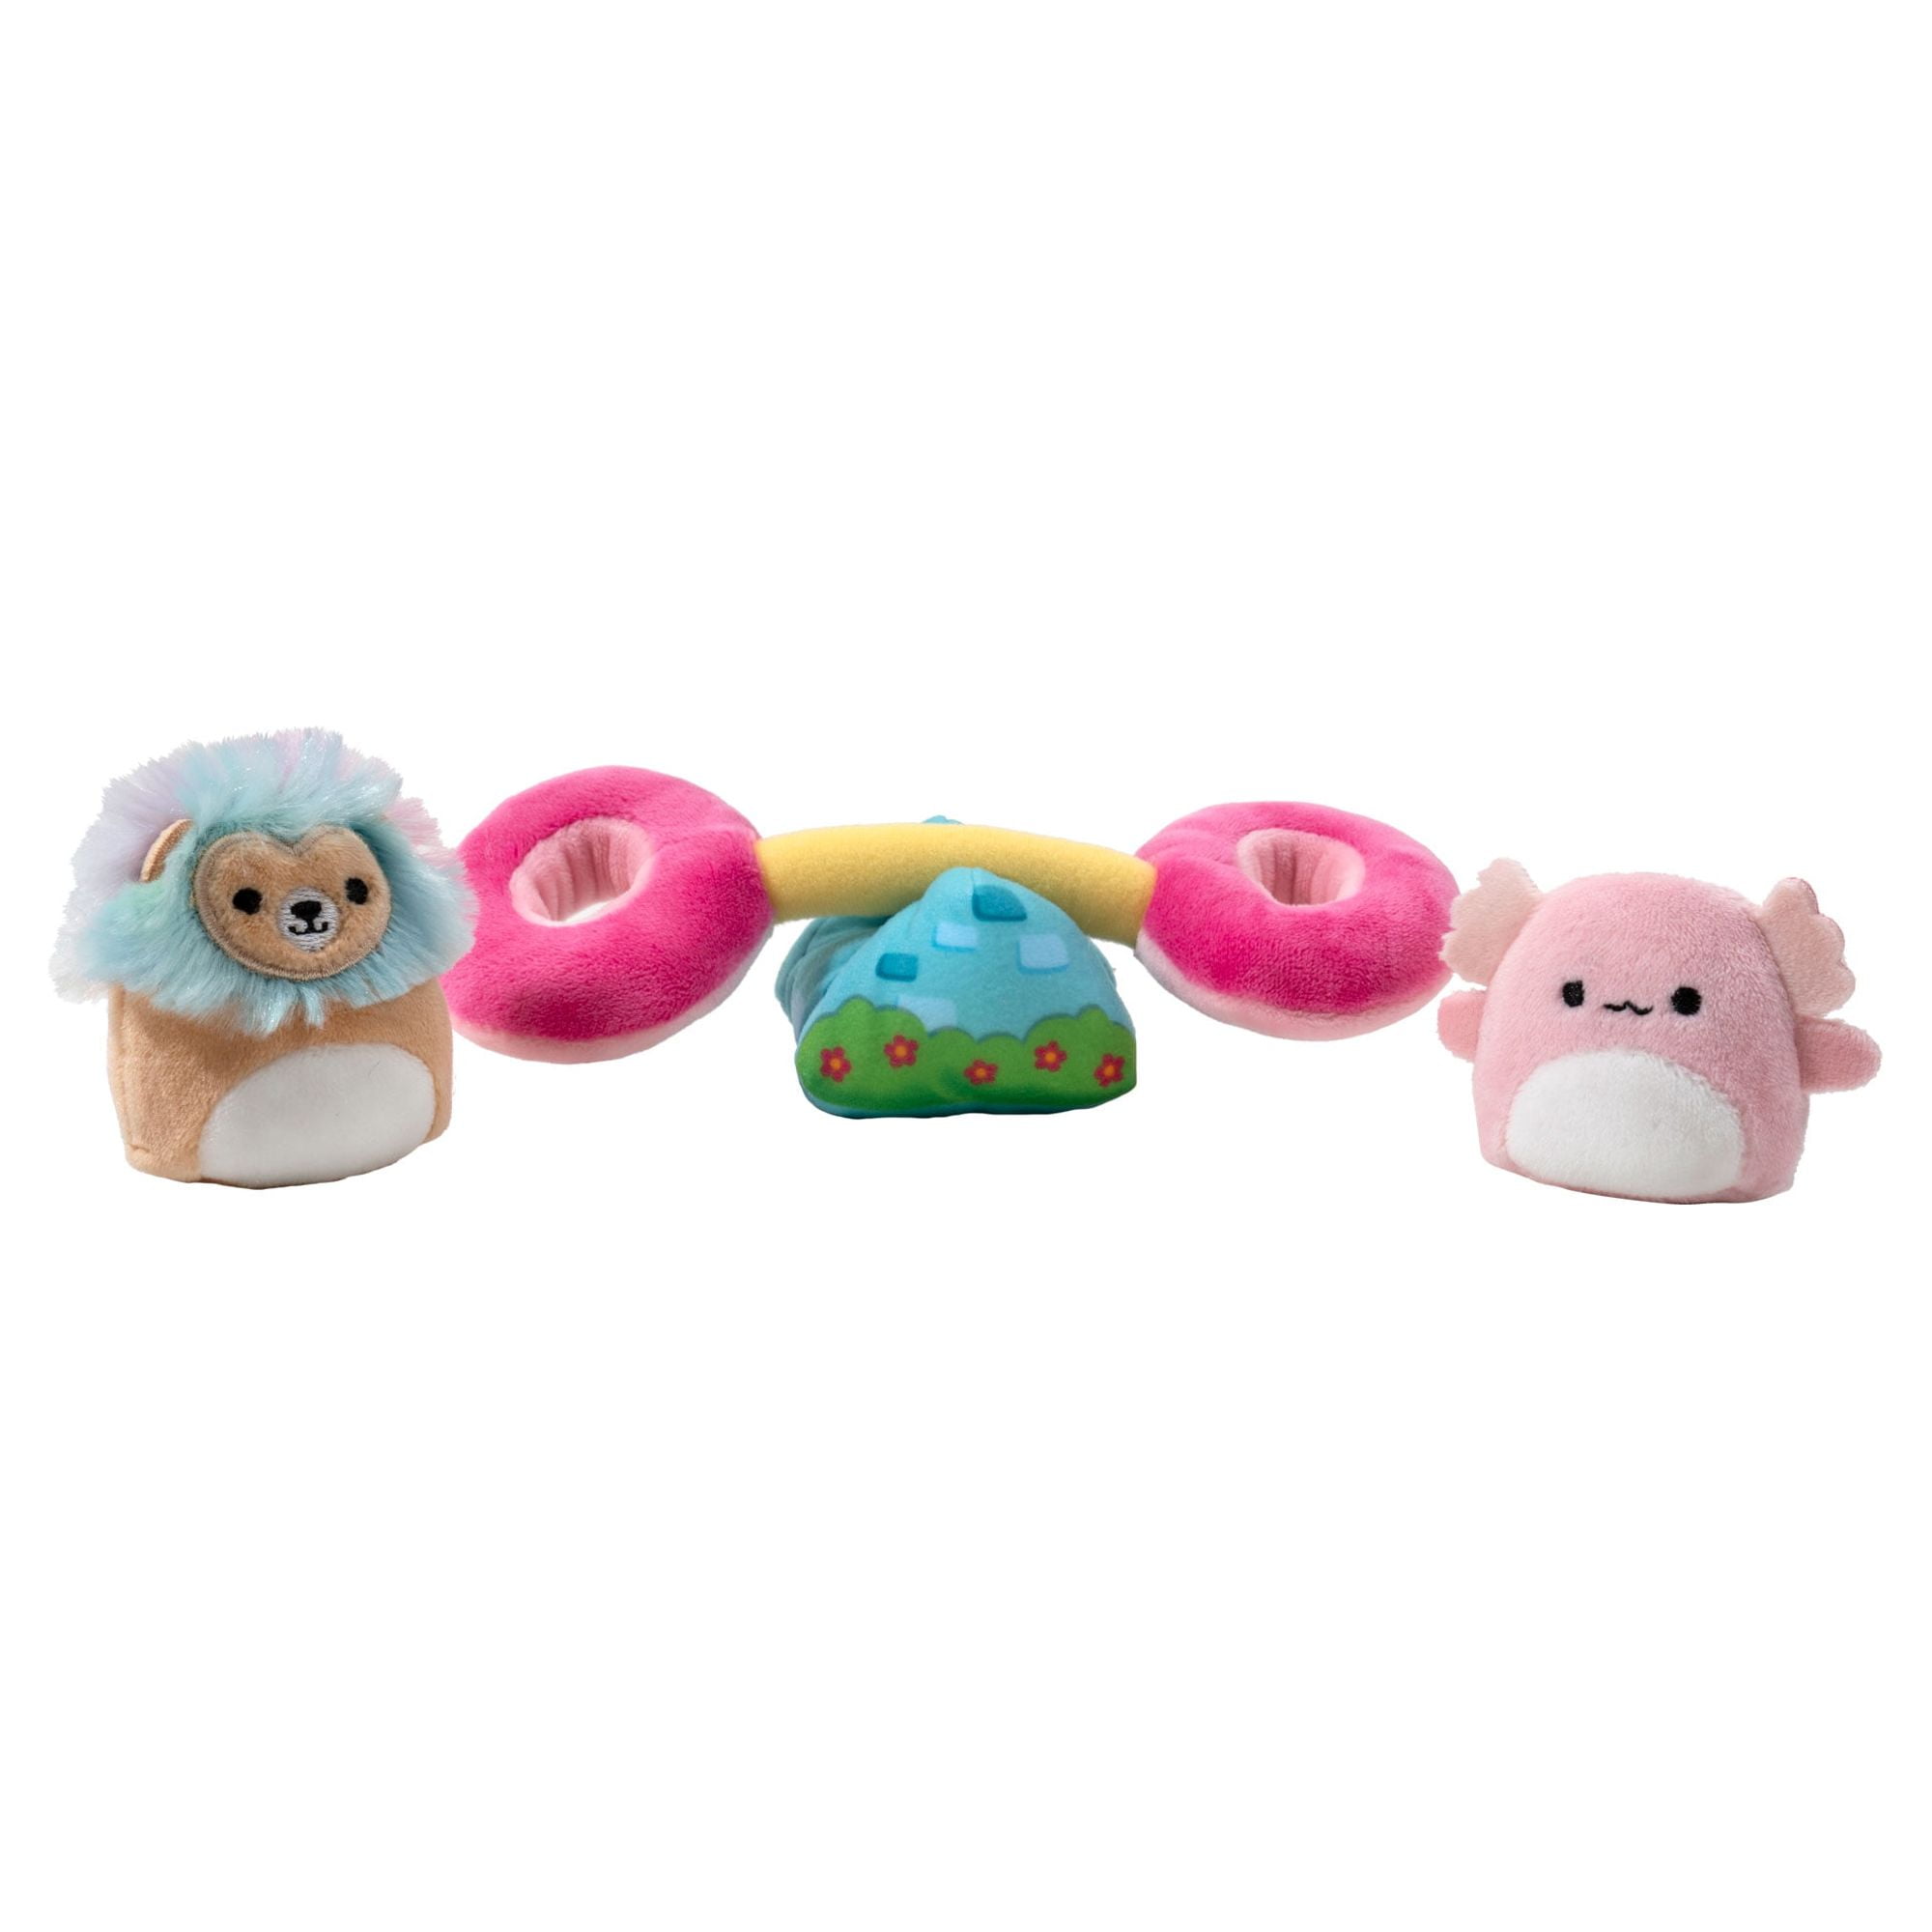  Squishville by Squishmallow Bakery Play Scene, 2” Winston Mini- Squishmallow, 8” Playset, 1 Plush Accessory, Marshmallow-Soft Animals,  Bakery Toy : Toys & Games